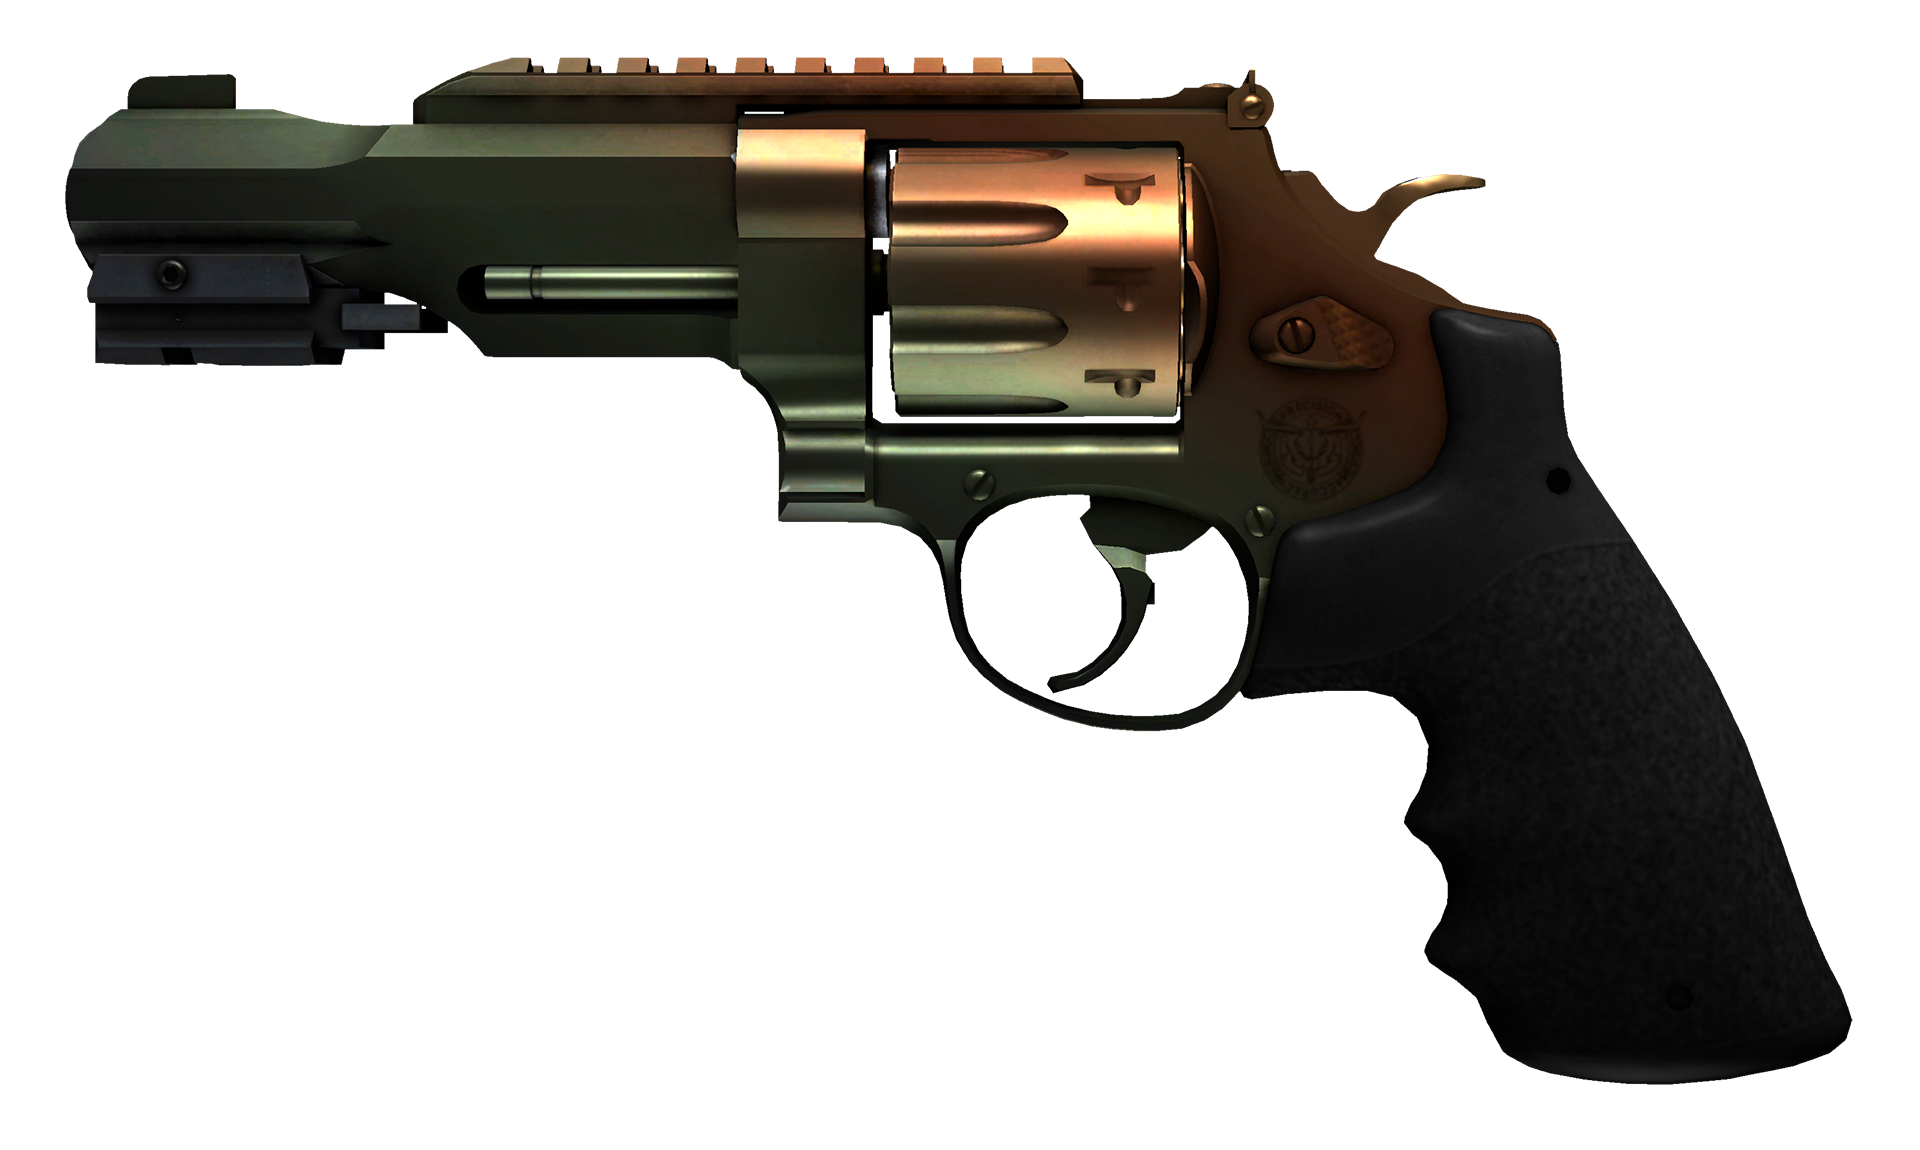 download the last version for ipod R8 Revolver Canal Spray cs go skin